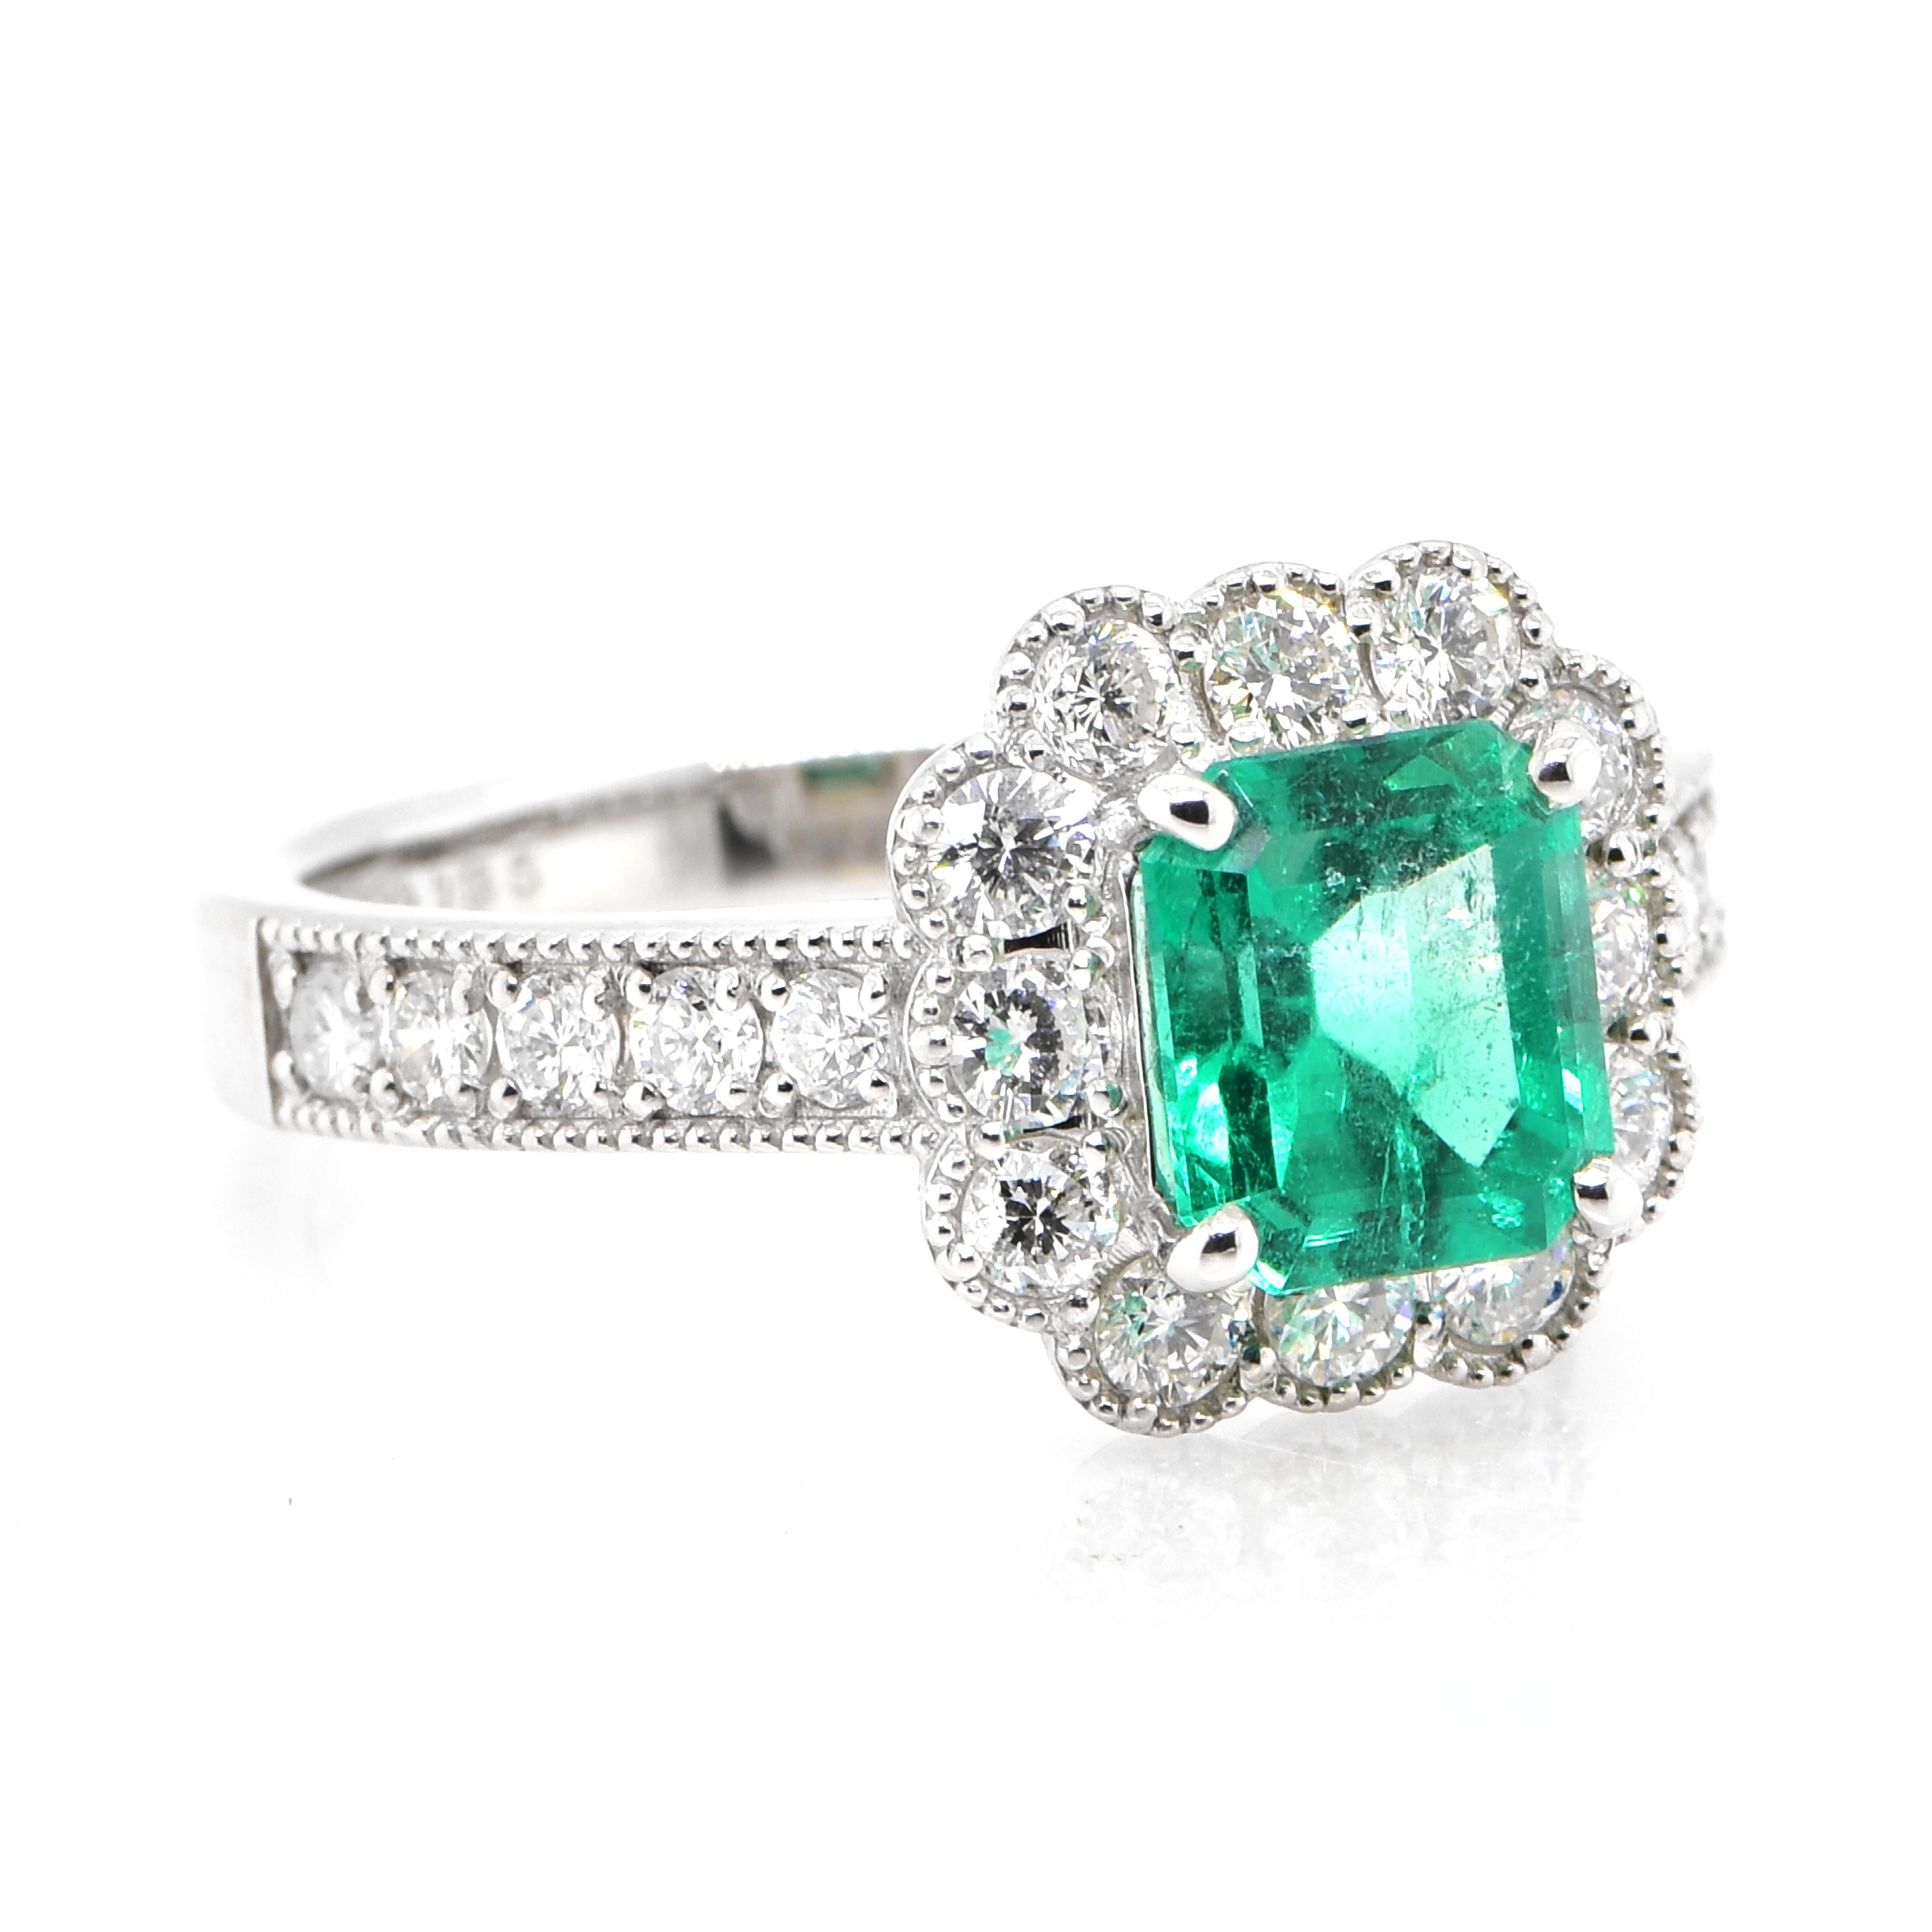 Modern 1.36 Carat Natural Colombian Emerald and Diamond Halo Ring set in Platinum For Sale